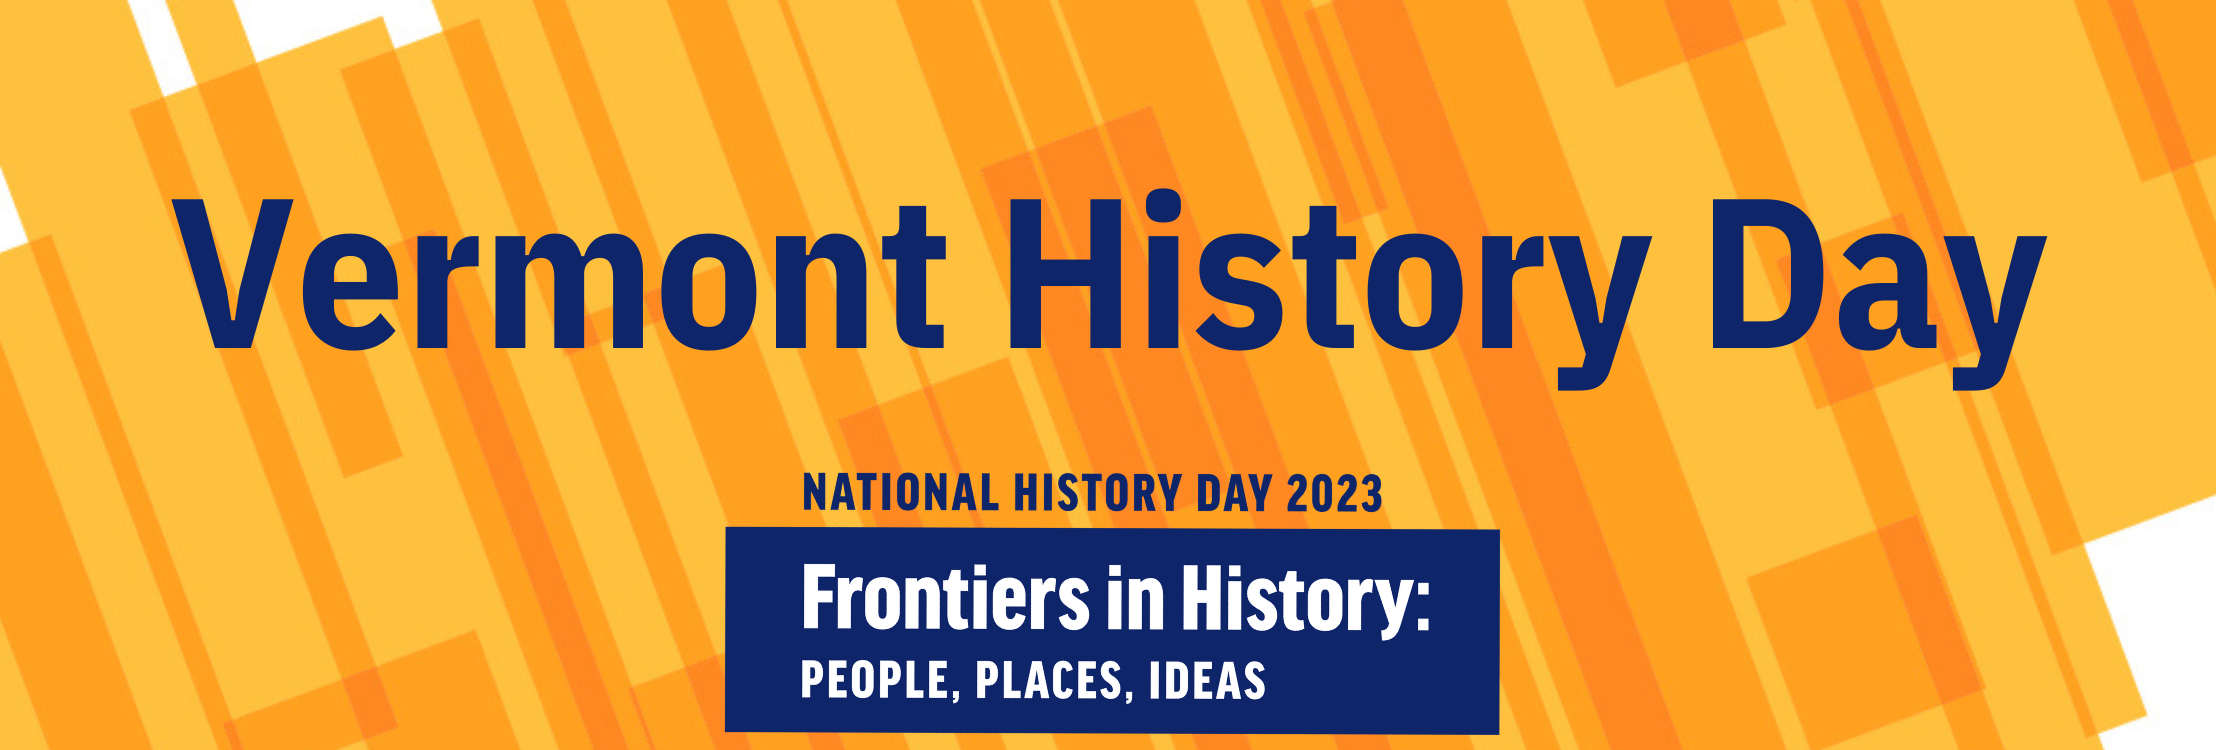 National History Day 2023, Frontiers in History: People, Places, Ideas